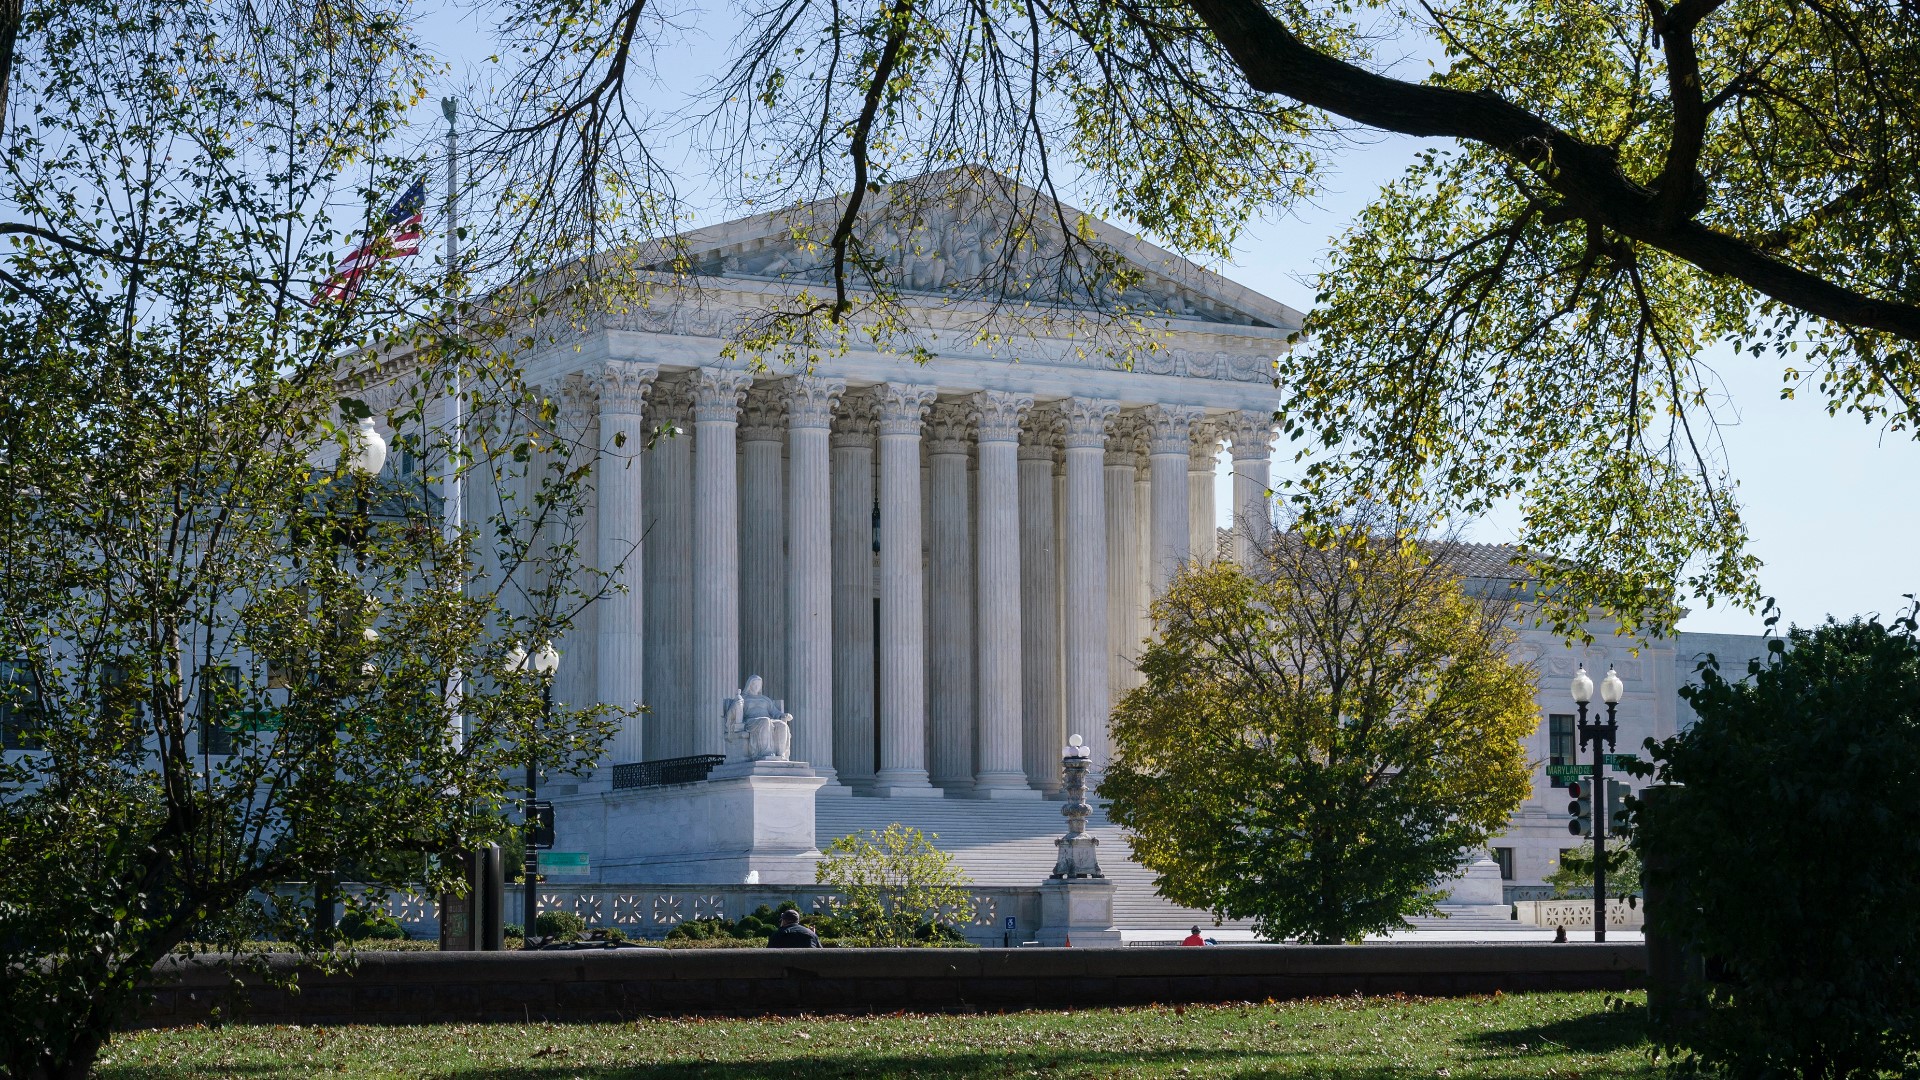 At the same time Coloradans are making 2021 health insurance selections, the United States Supreme Court heard oral arguments on the fate of the Affordable Care Act.